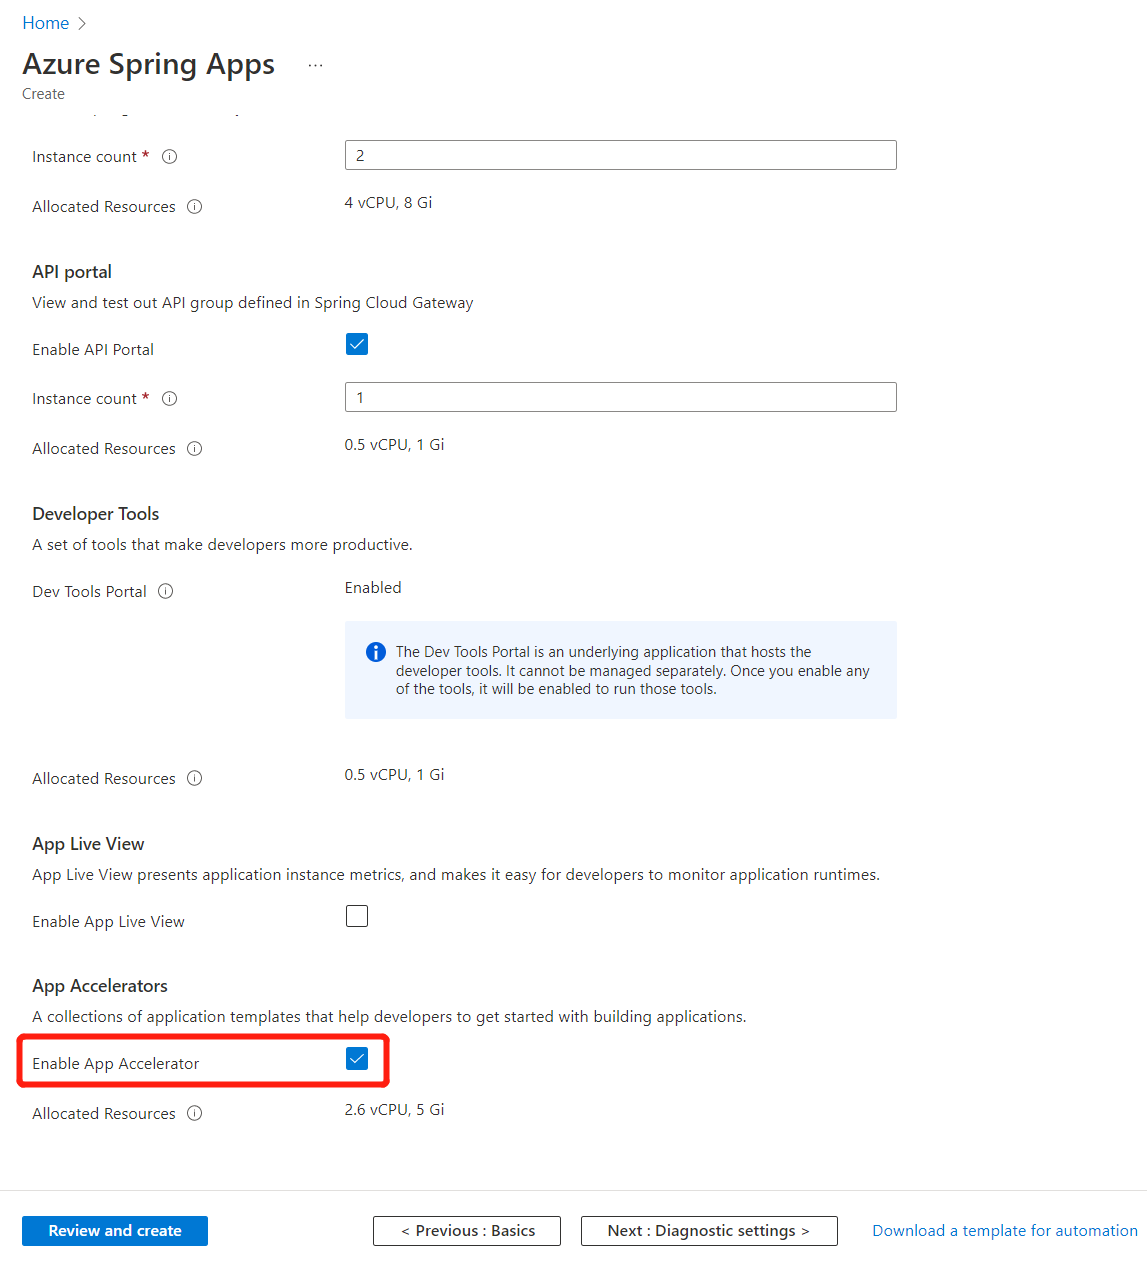 Screenshot of the Azure portal showing the VMware Tanzu settings tab of the Azure Spring Apps Create screen, with the Enable App Accelerator checkbox highlighted.